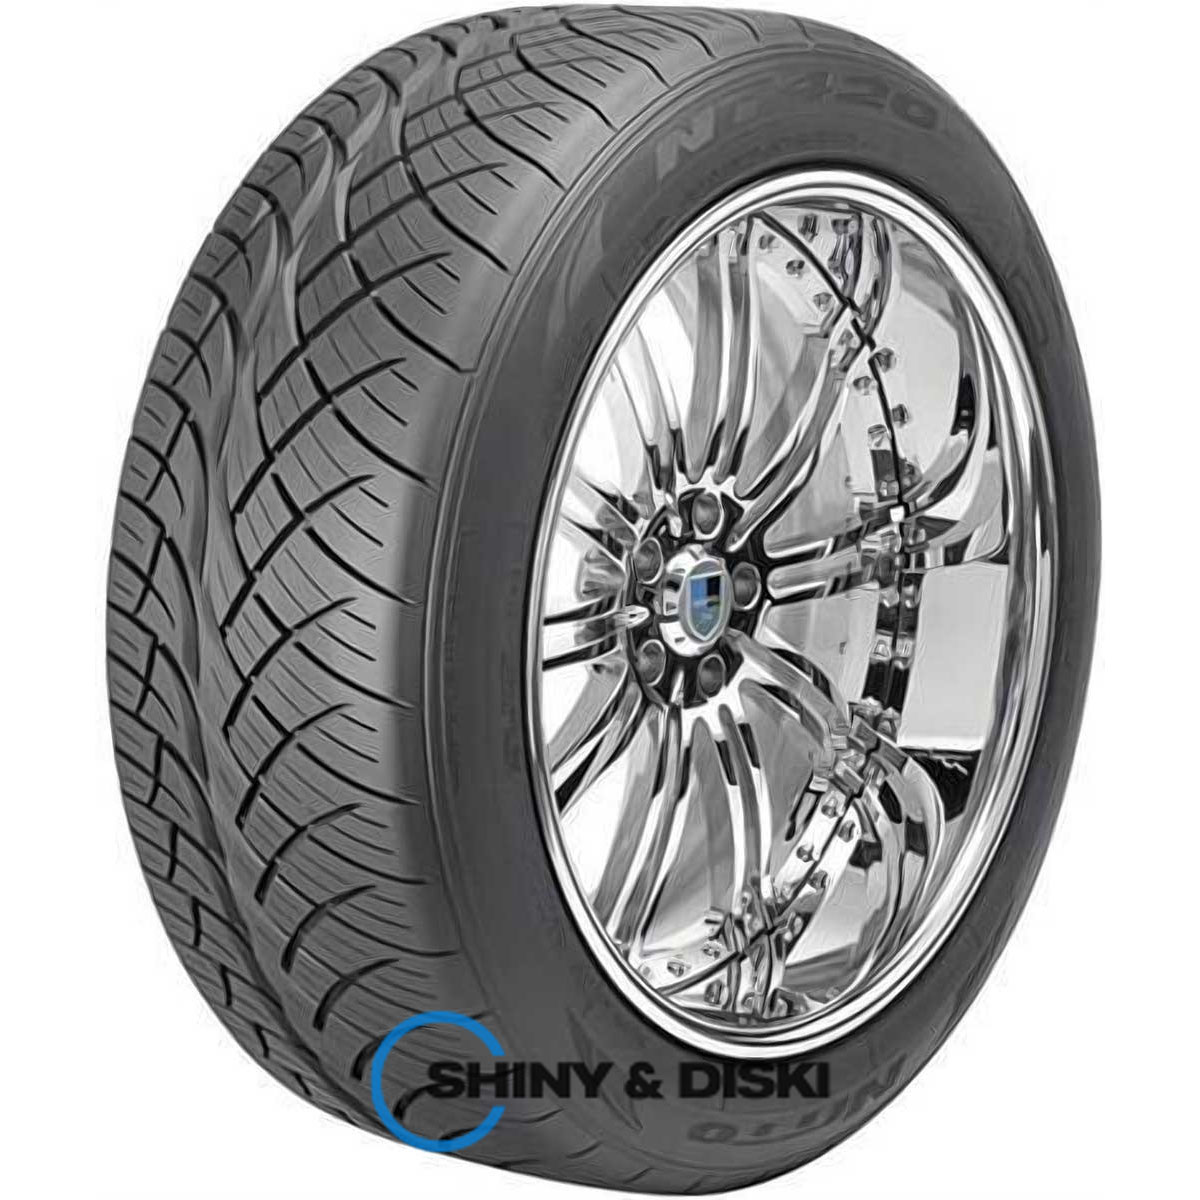 nitto nt420s 285/45 r22 114h reinforced